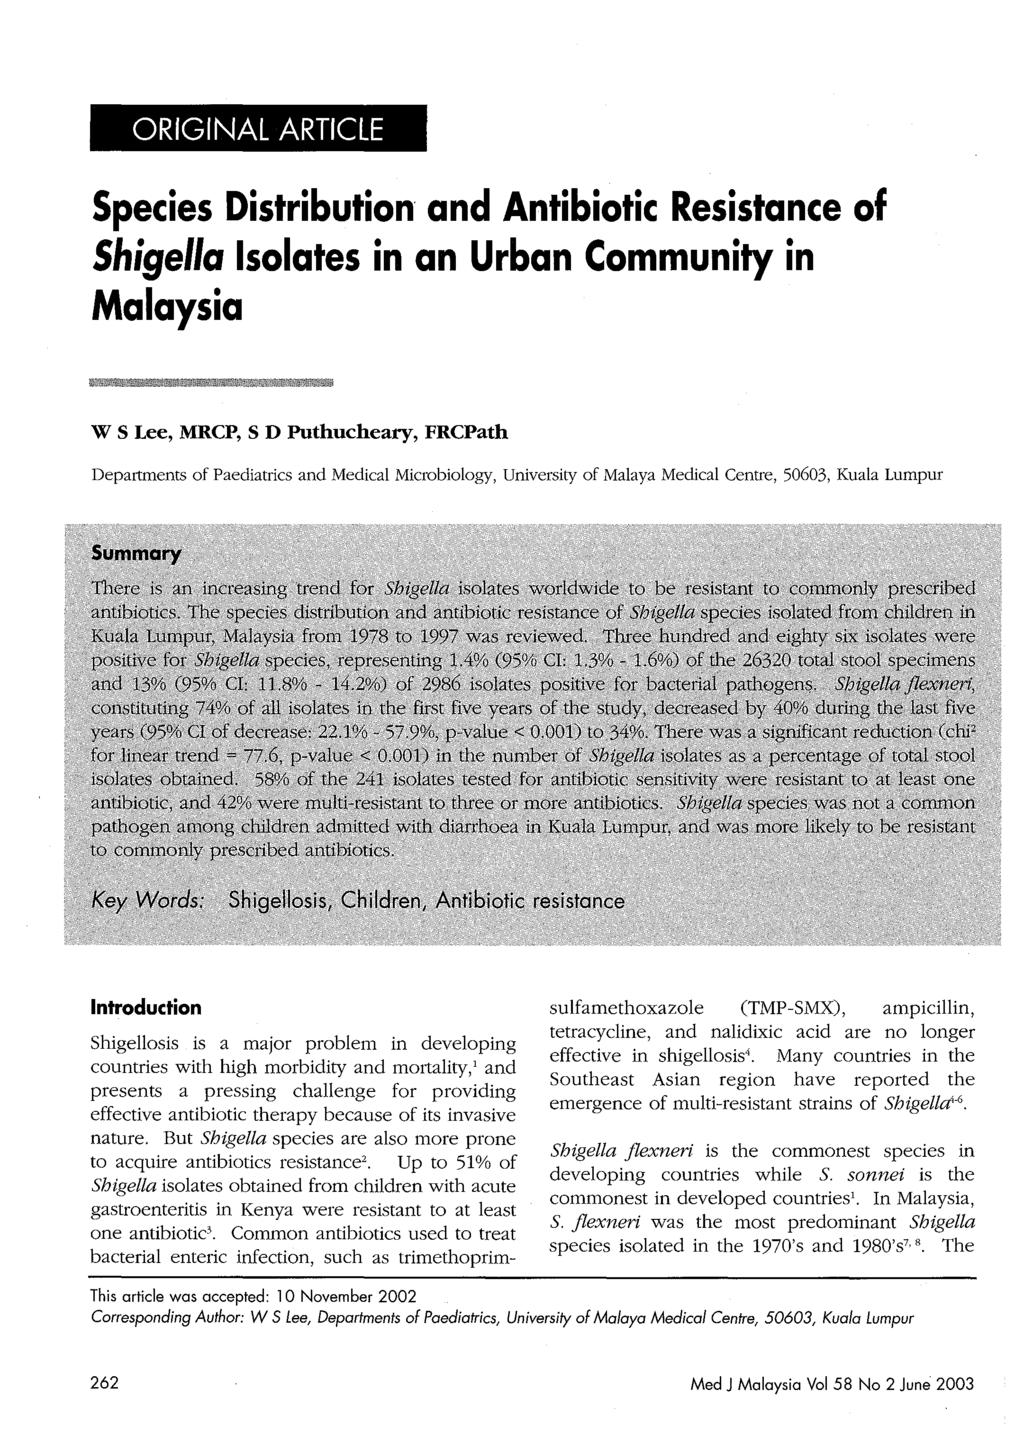 ORIGINAL ARTICLE Species Distribution' and Antibiotic Resistance of Shigella Isolates in an Urban Community in Malaysia W S Lee, MRCP, S D Puthucheary, FRCPath Departments of Paediatrics and Medical